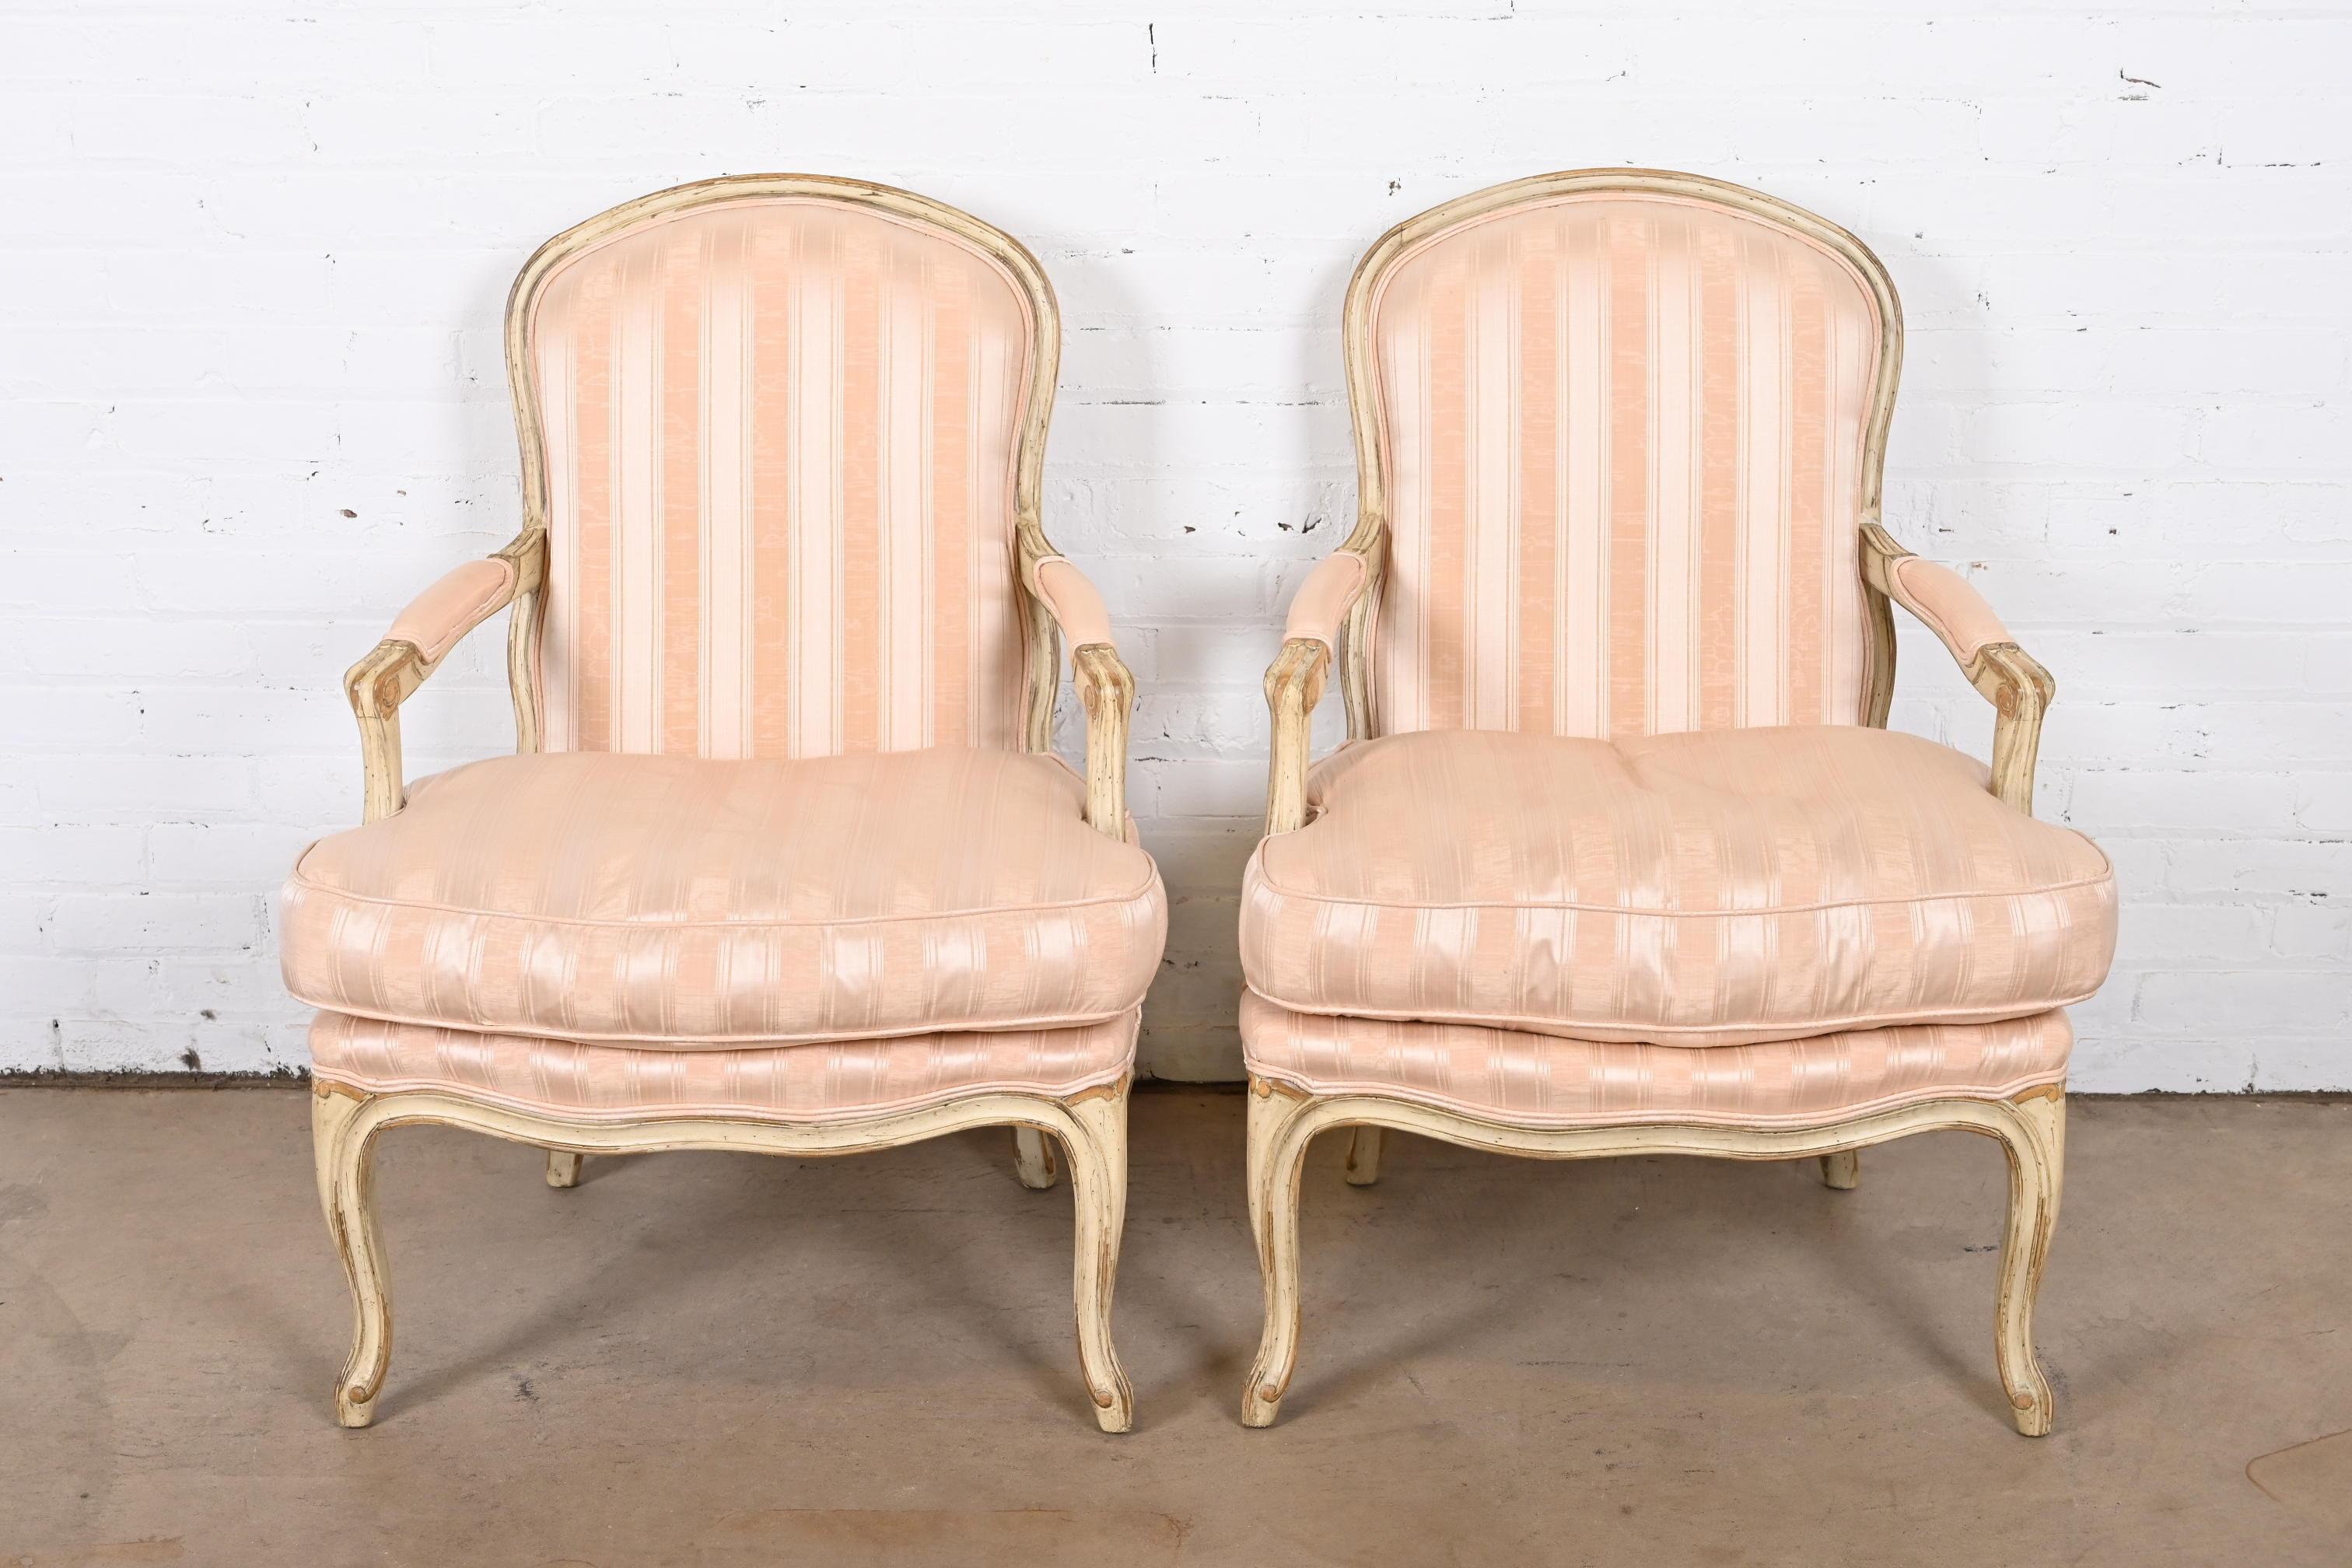 20th Century Baker Furniture French Provincial Louis XV Fauteuils, Pair For Sale